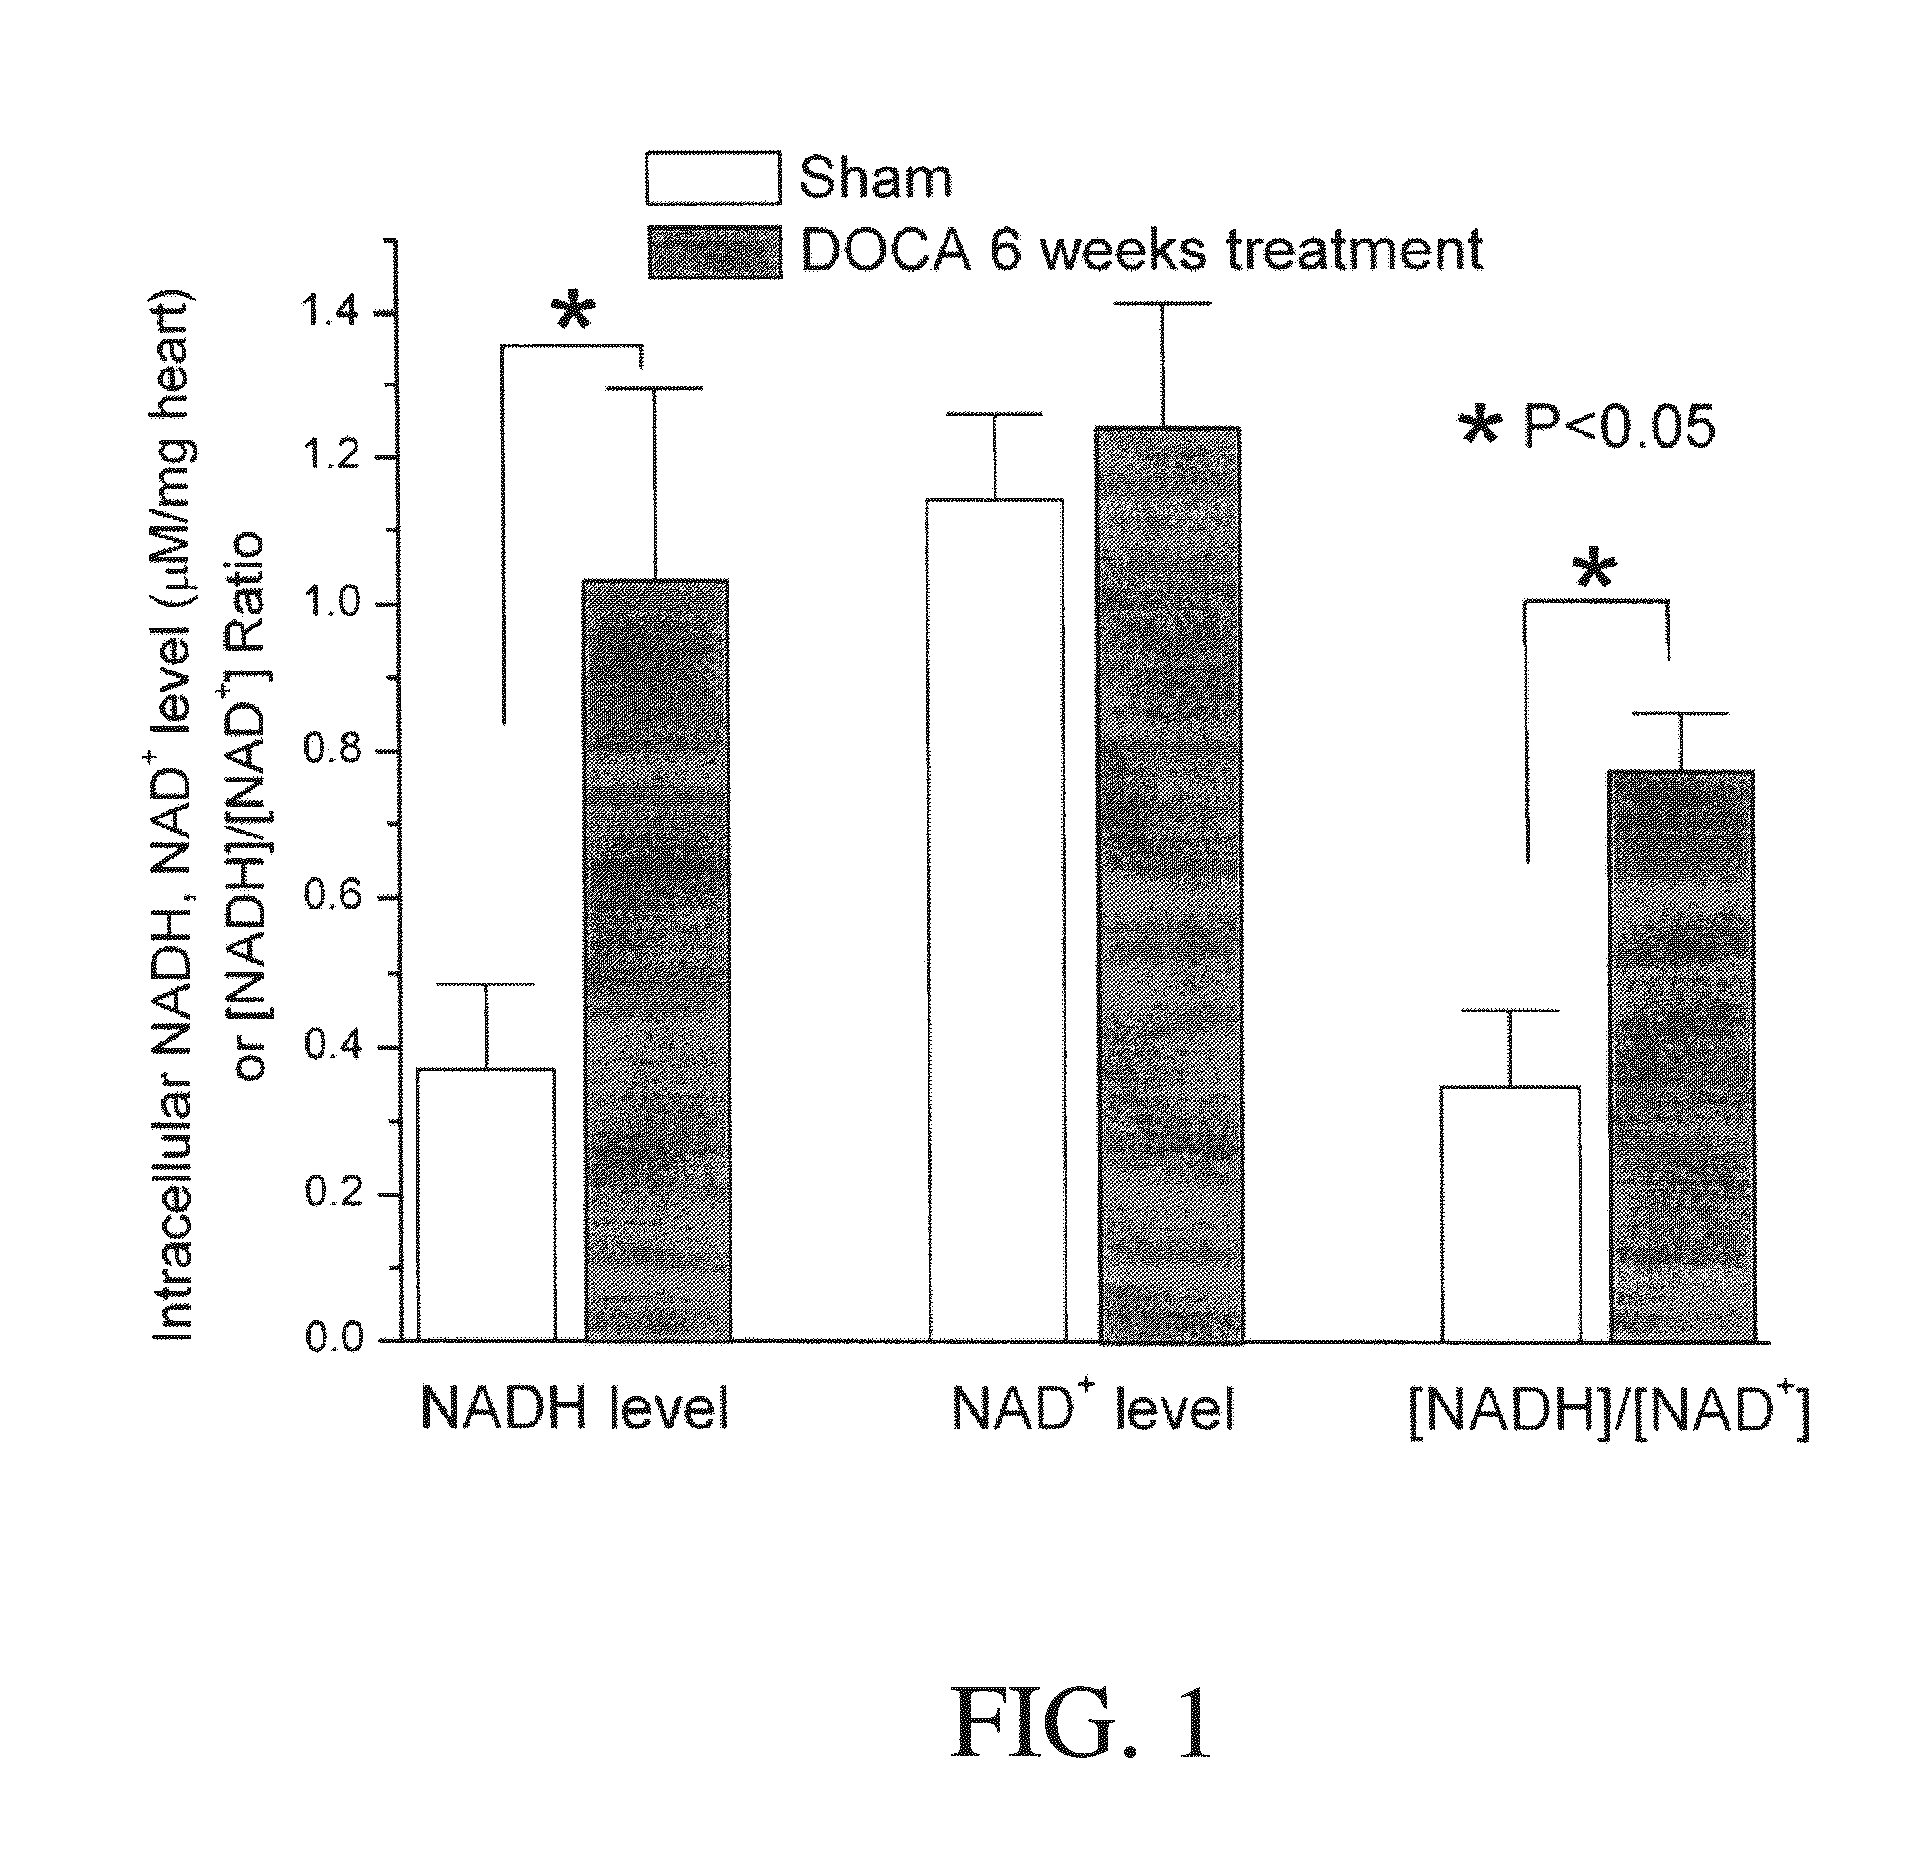 Method for Ameliorating or Preventing Arrhythmic Risk Associated with Cardiomyopathy